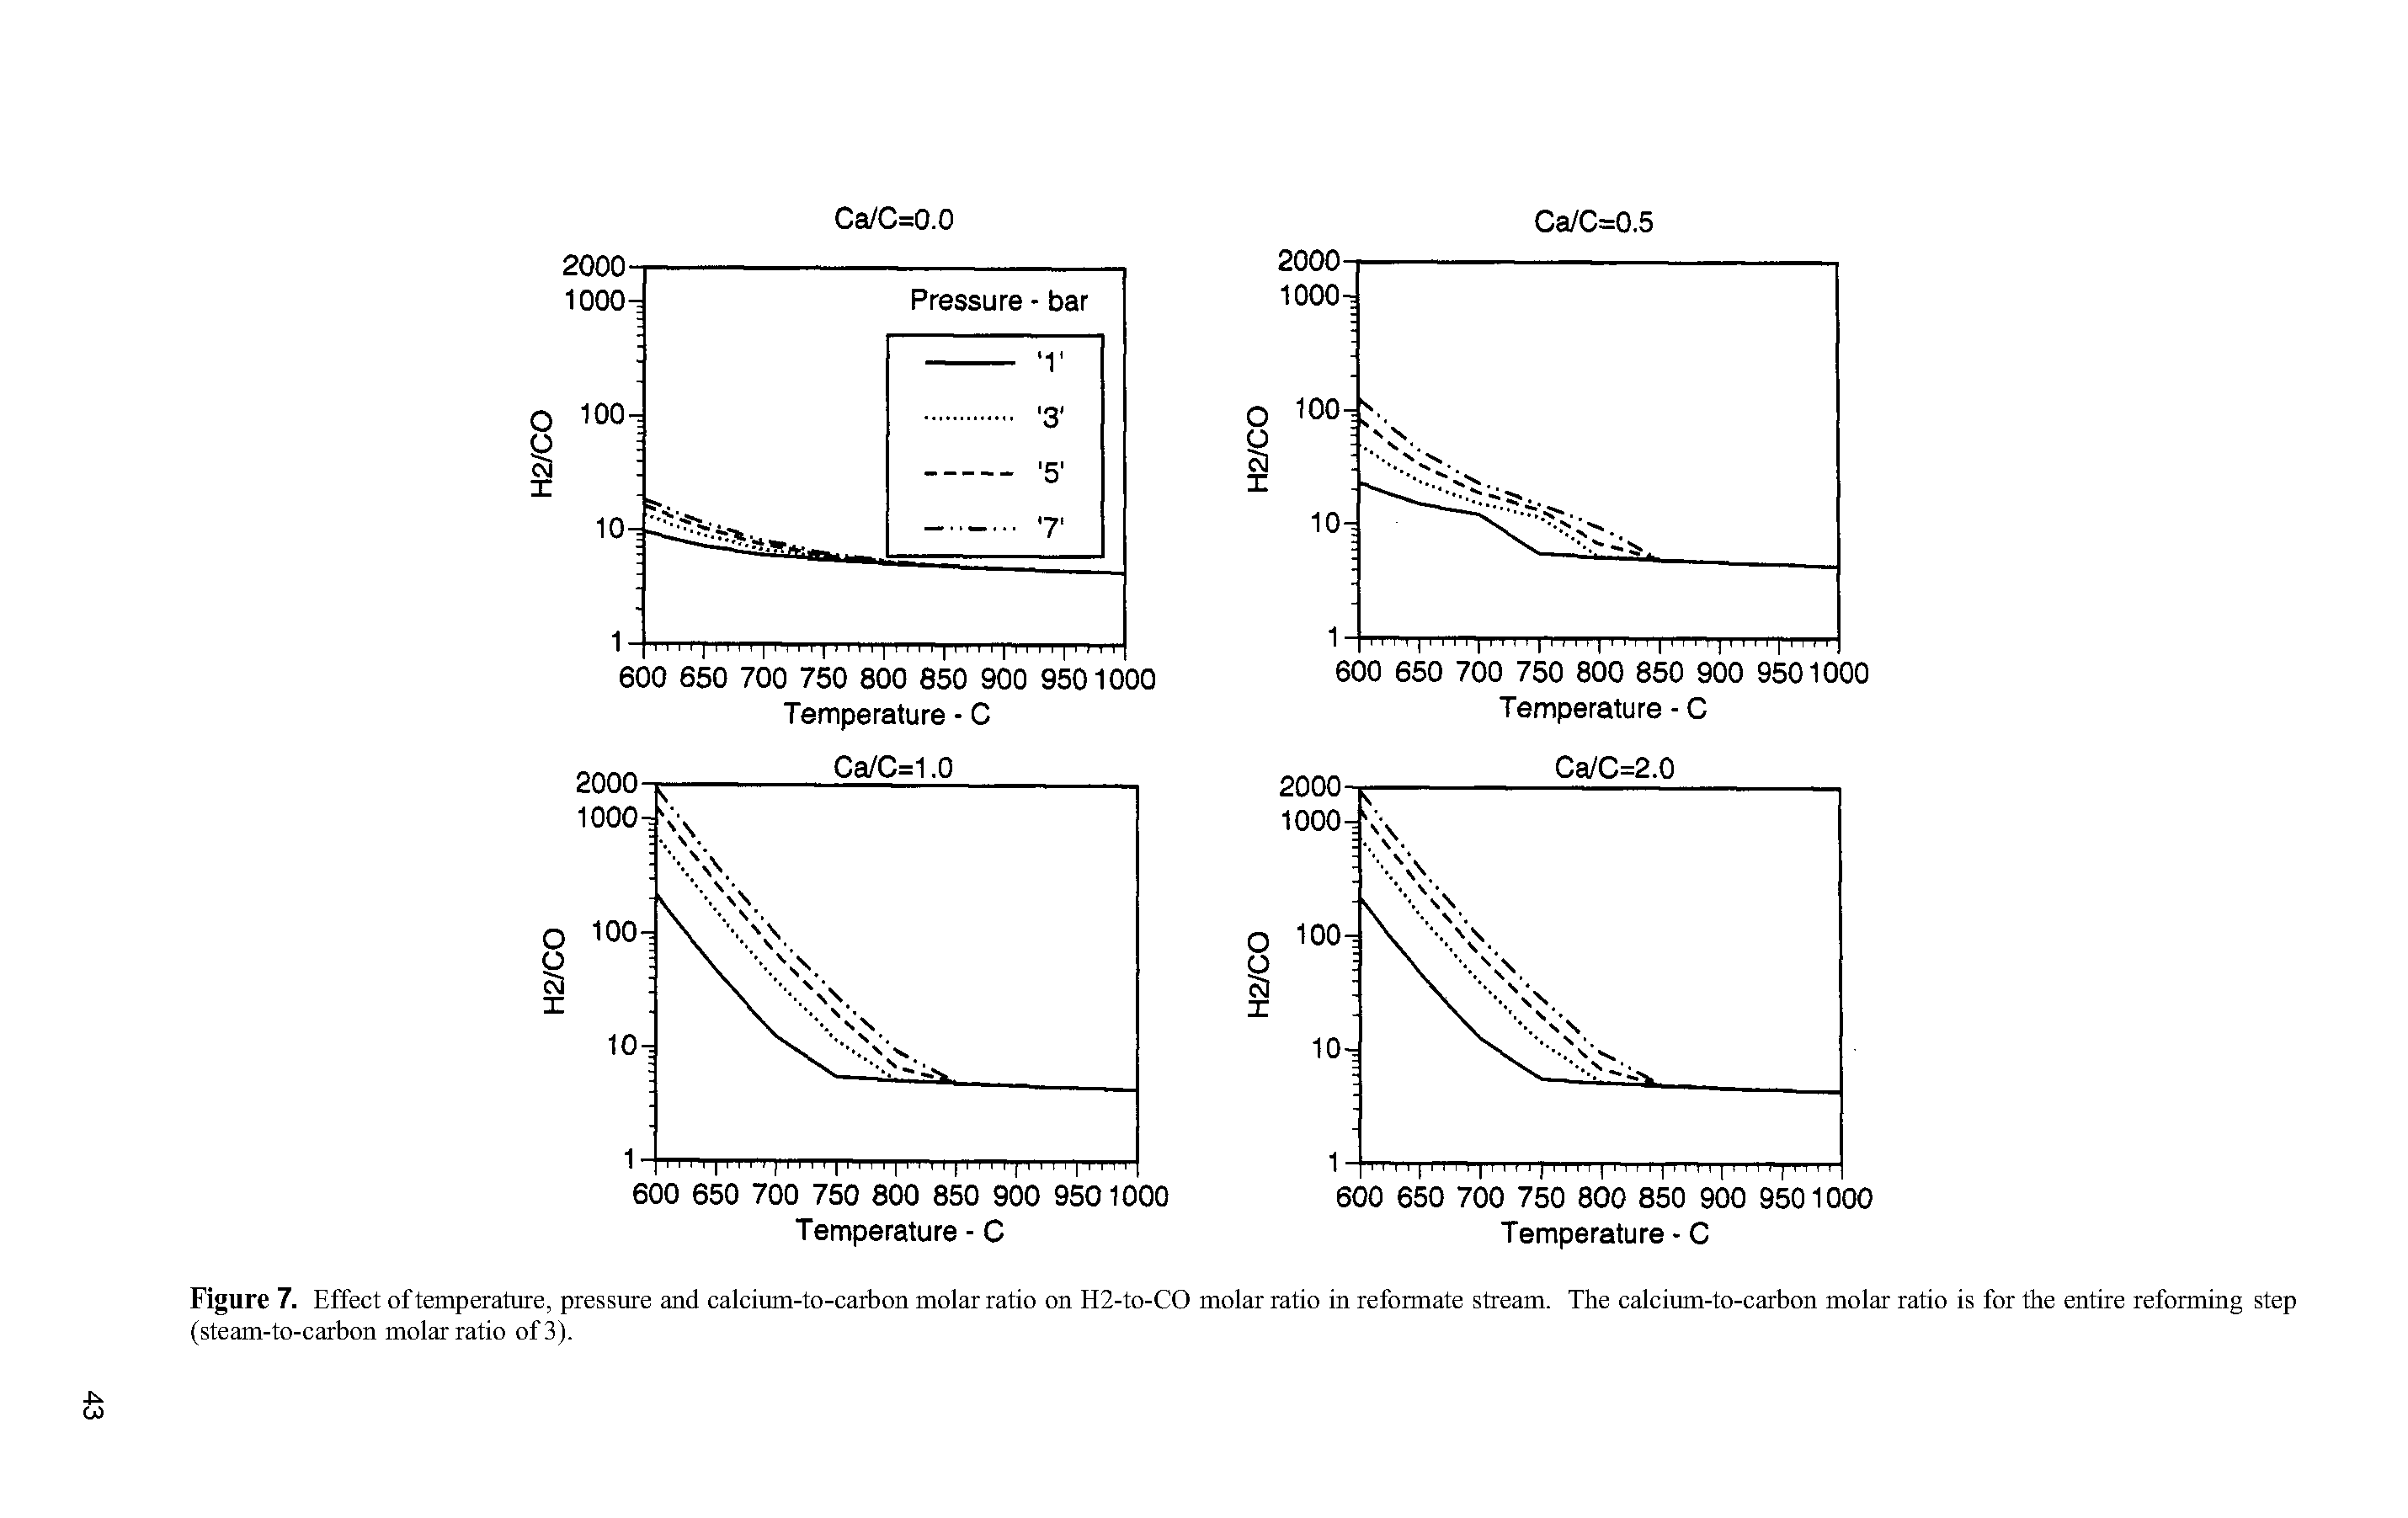 Figure 7. Effect of temperature, pressure and calcium-to-carbon molar ratio on H2-to-CO molar ratio in reformate stream. The calcium-to-carbon molar ratio is for the entire reforming step (steam-to-carbon molar ratio of 3).